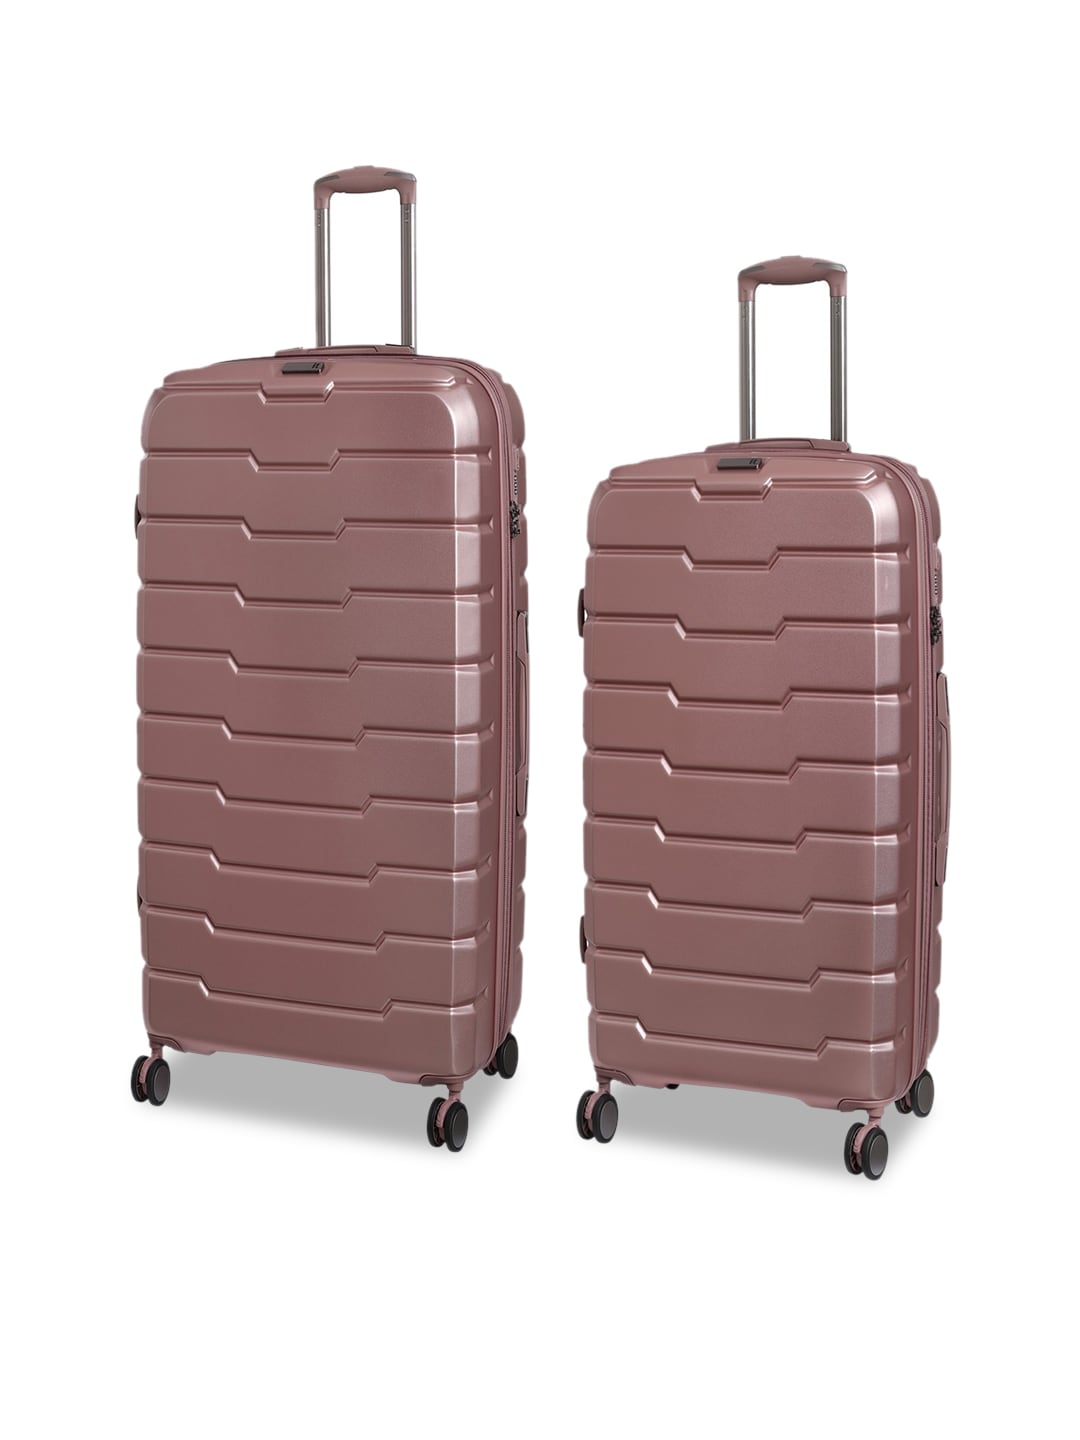 IT luggage Pink Textured Set of 2 Hard-Sided Trolley Suitcase Price in India